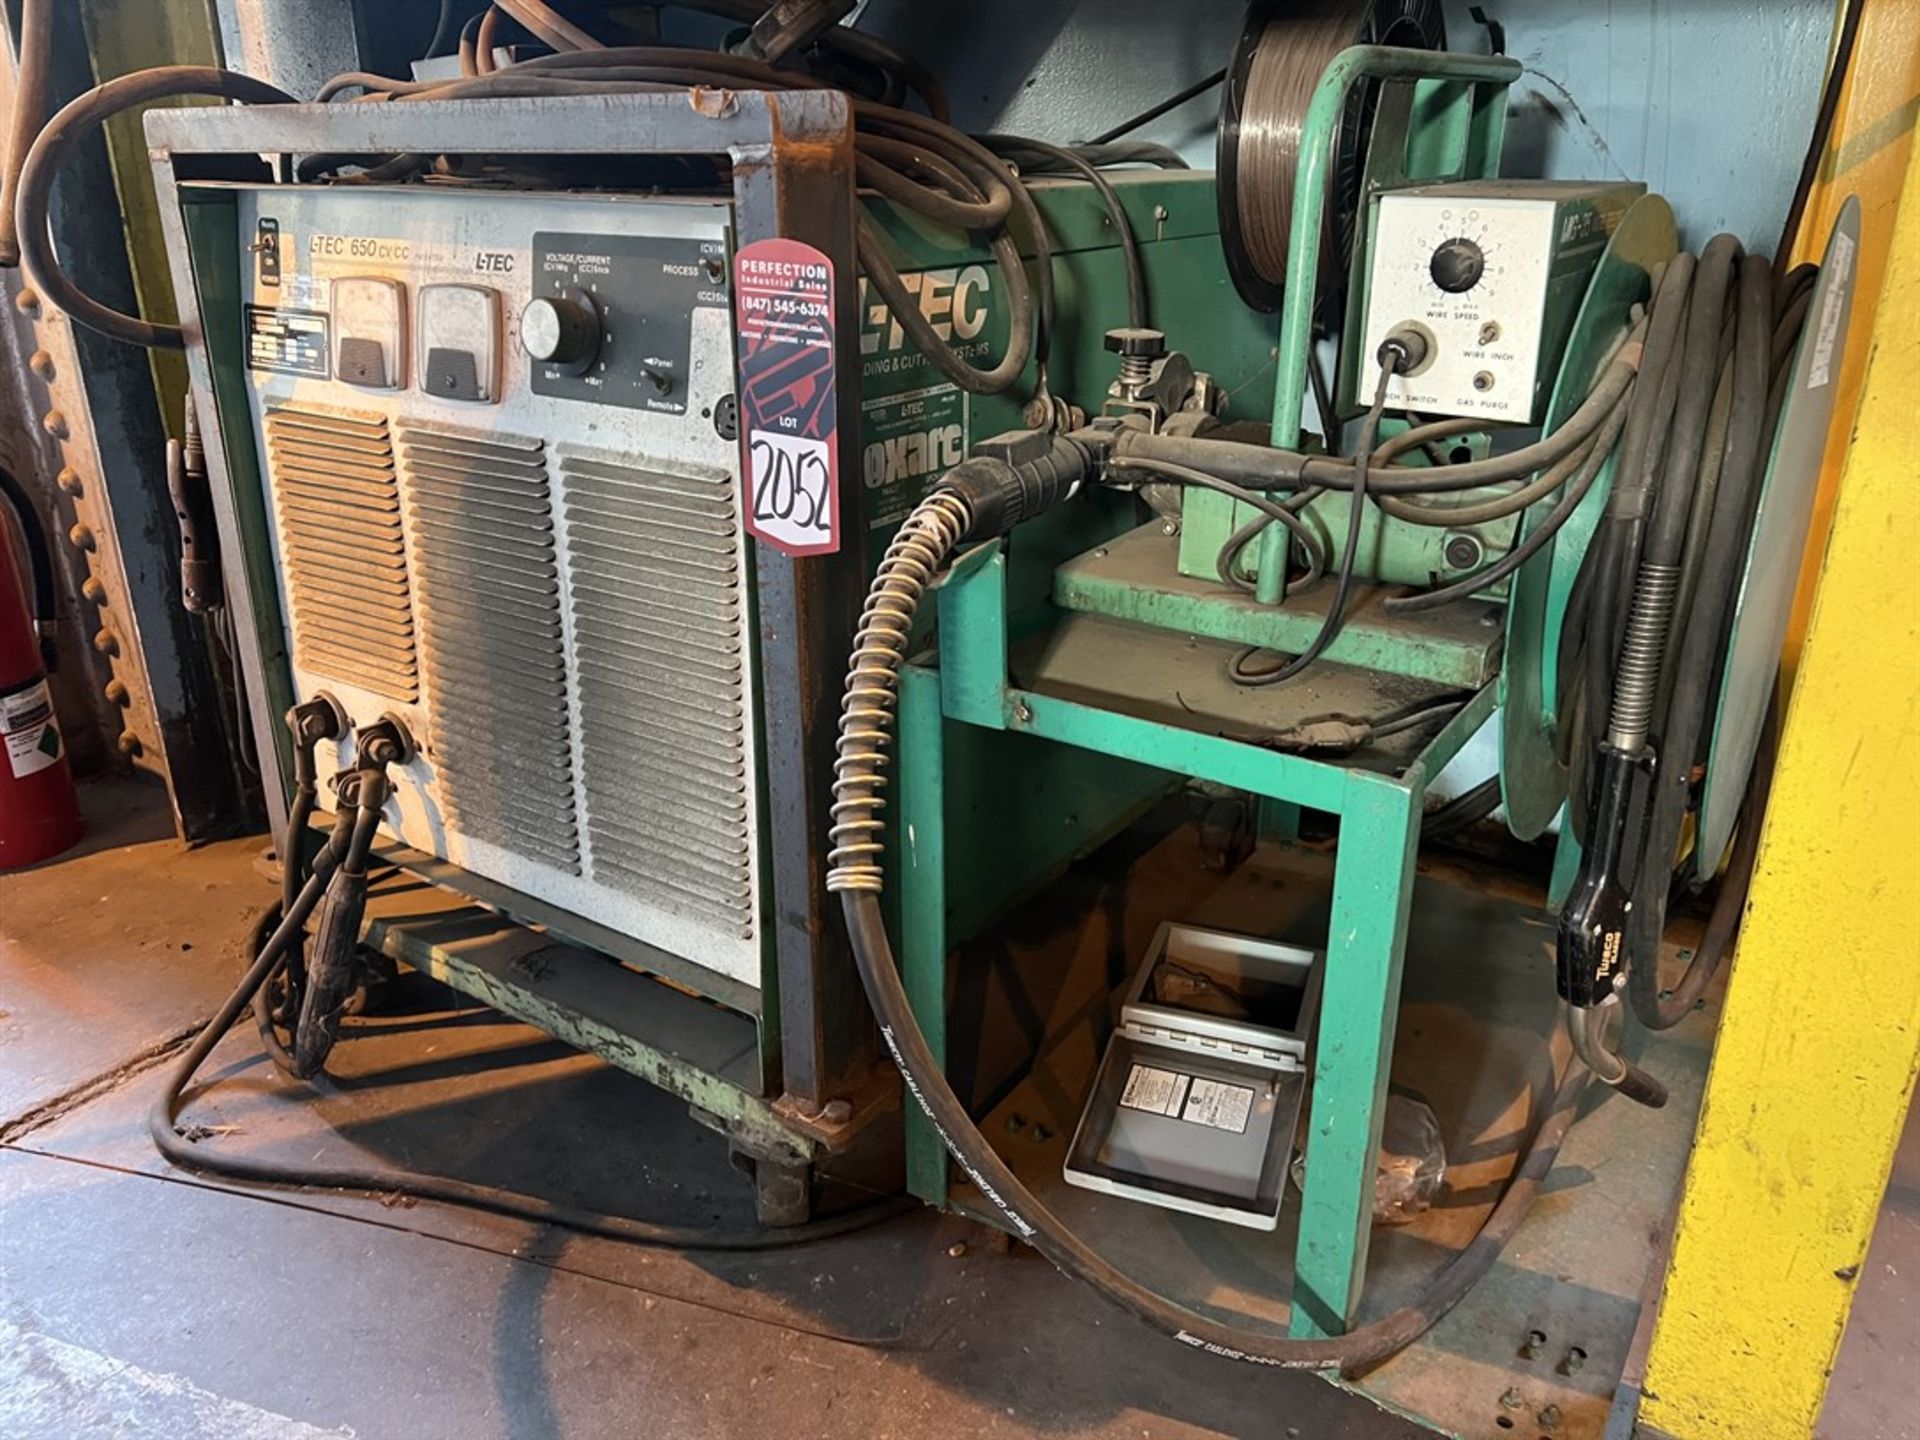 L-TEC 650CV/CC MIG Welder, s/n F89C-05759, w/ MIG-35 Wire Feeder - Image 3 of 5